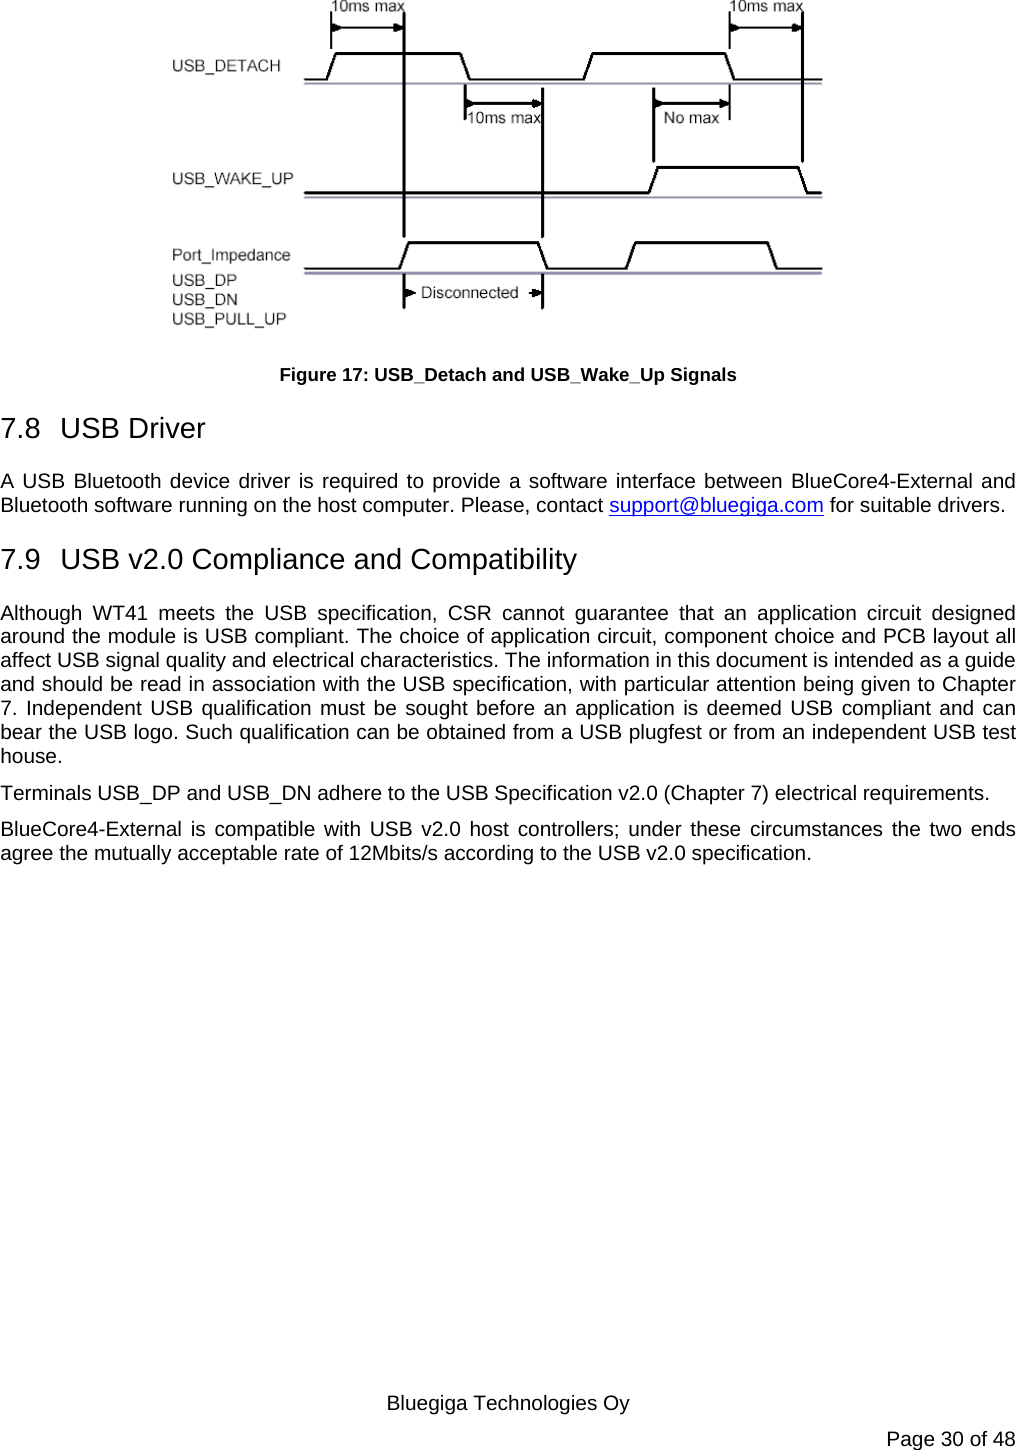   Bluegiga Technologies Oy Page 30 of 48  Figure 17: USB_Detach and USB_Wake_Up Signals 7.8 USB Driver A USB Bluetooth device driver is required to provide a software interface between BlueCore4-External and Bluetooth software running on the host computer. Please, contact support@bluegiga.com for suitable drivers. 7.9  USB v2.0 Compliance and Compatibility Although WT41 meets the USB specification, CSR cannot guarantee that an application circuit designed around the module is USB compliant. The choice of application circuit, component choice and PCB layout all affect USB signal quality and electrical characteristics. The information in this document is intended as a guide and should be read in association with the USB specification, with particular attention being given to Chapter 7. Independent USB qualification must be sought before an application is deemed USB compliant and can bear the USB logo. Such qualification can be obtained from a USB plugfest or from an independent USB test house. Terminals USB_DP and USB_DN adhere to the USB Specification v2.0 (Chapter 7) electrical requirements. BlueCore4-External is compatible with USB v2.0 host controllers; under these circumstances the two ends agree the mutually acceptable rate of 12Mbits/s according to the USB v2.0 specification.  